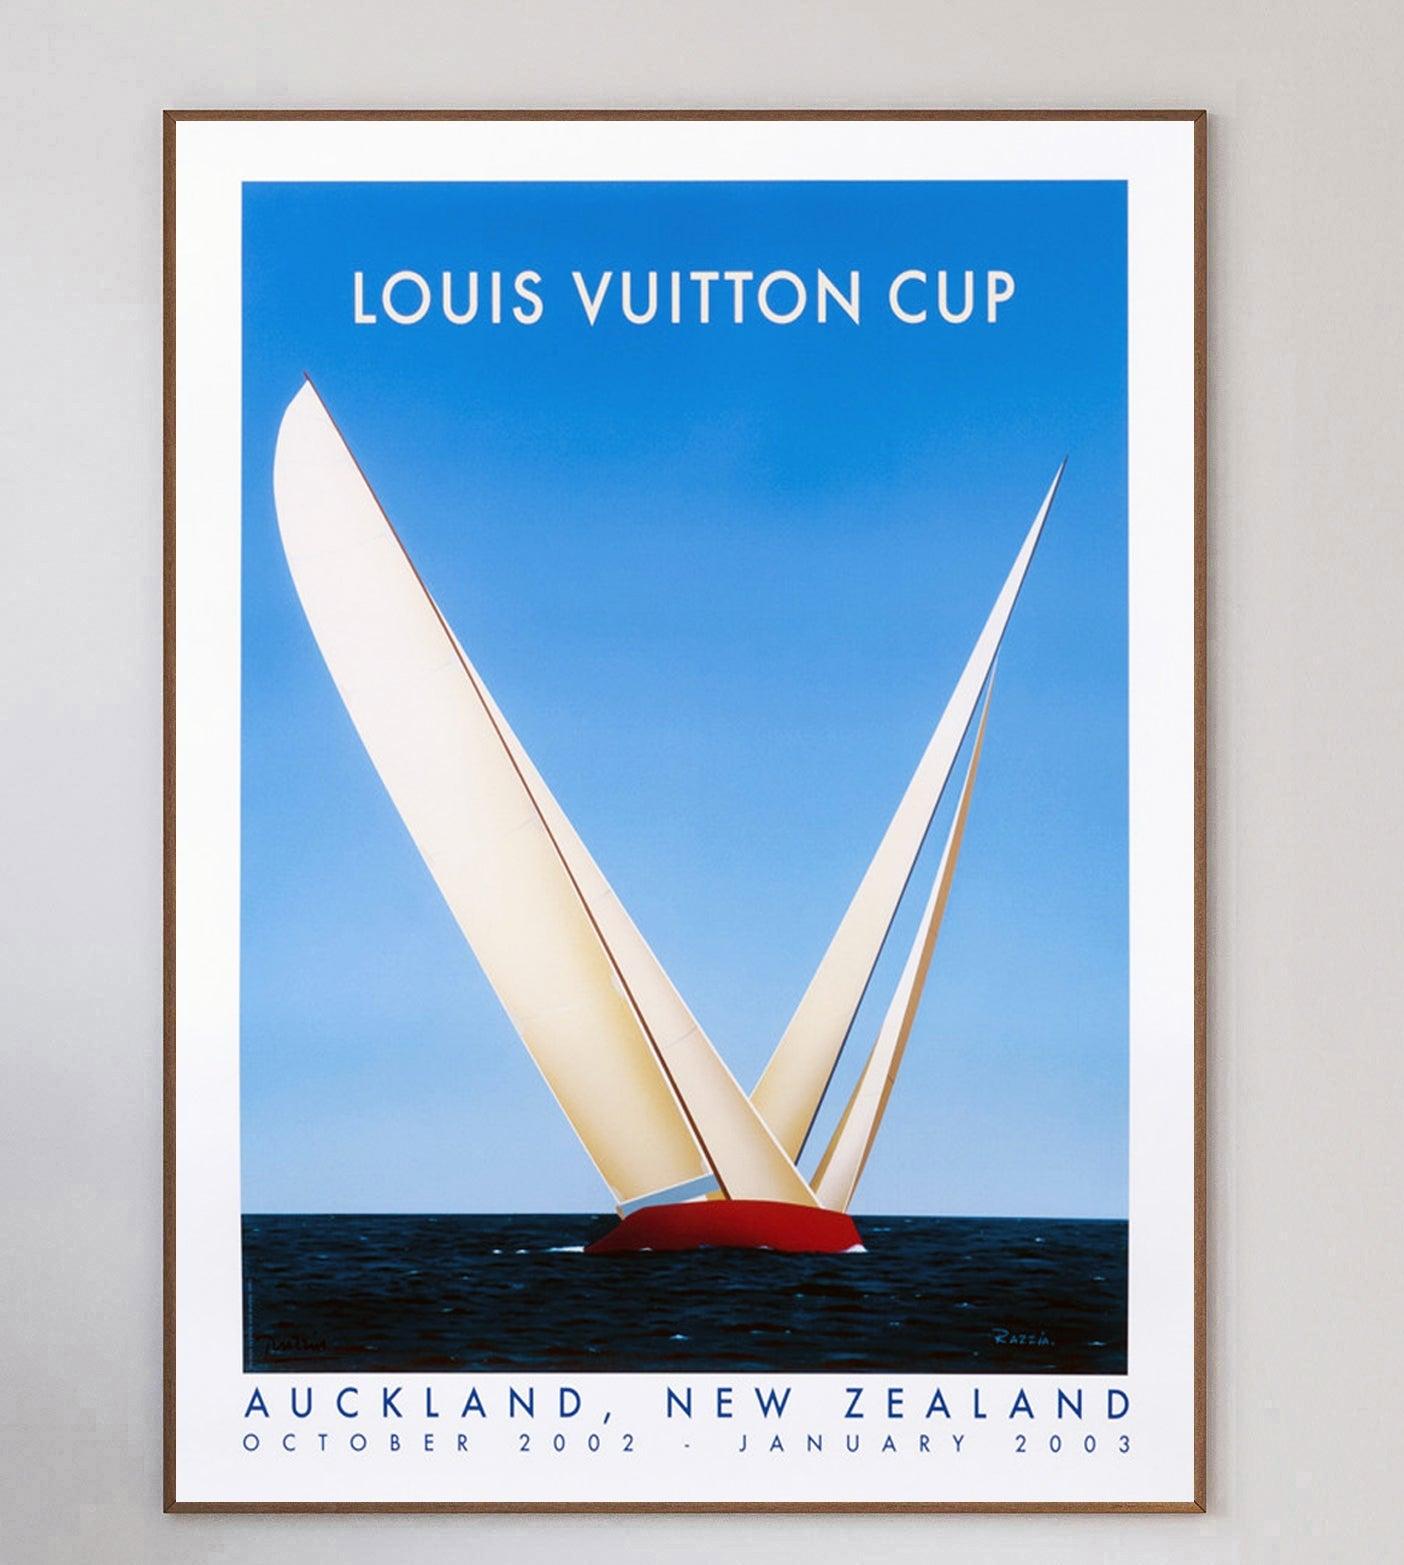 Louis Vuitton Paper Cups - For Sale on 1stDibs